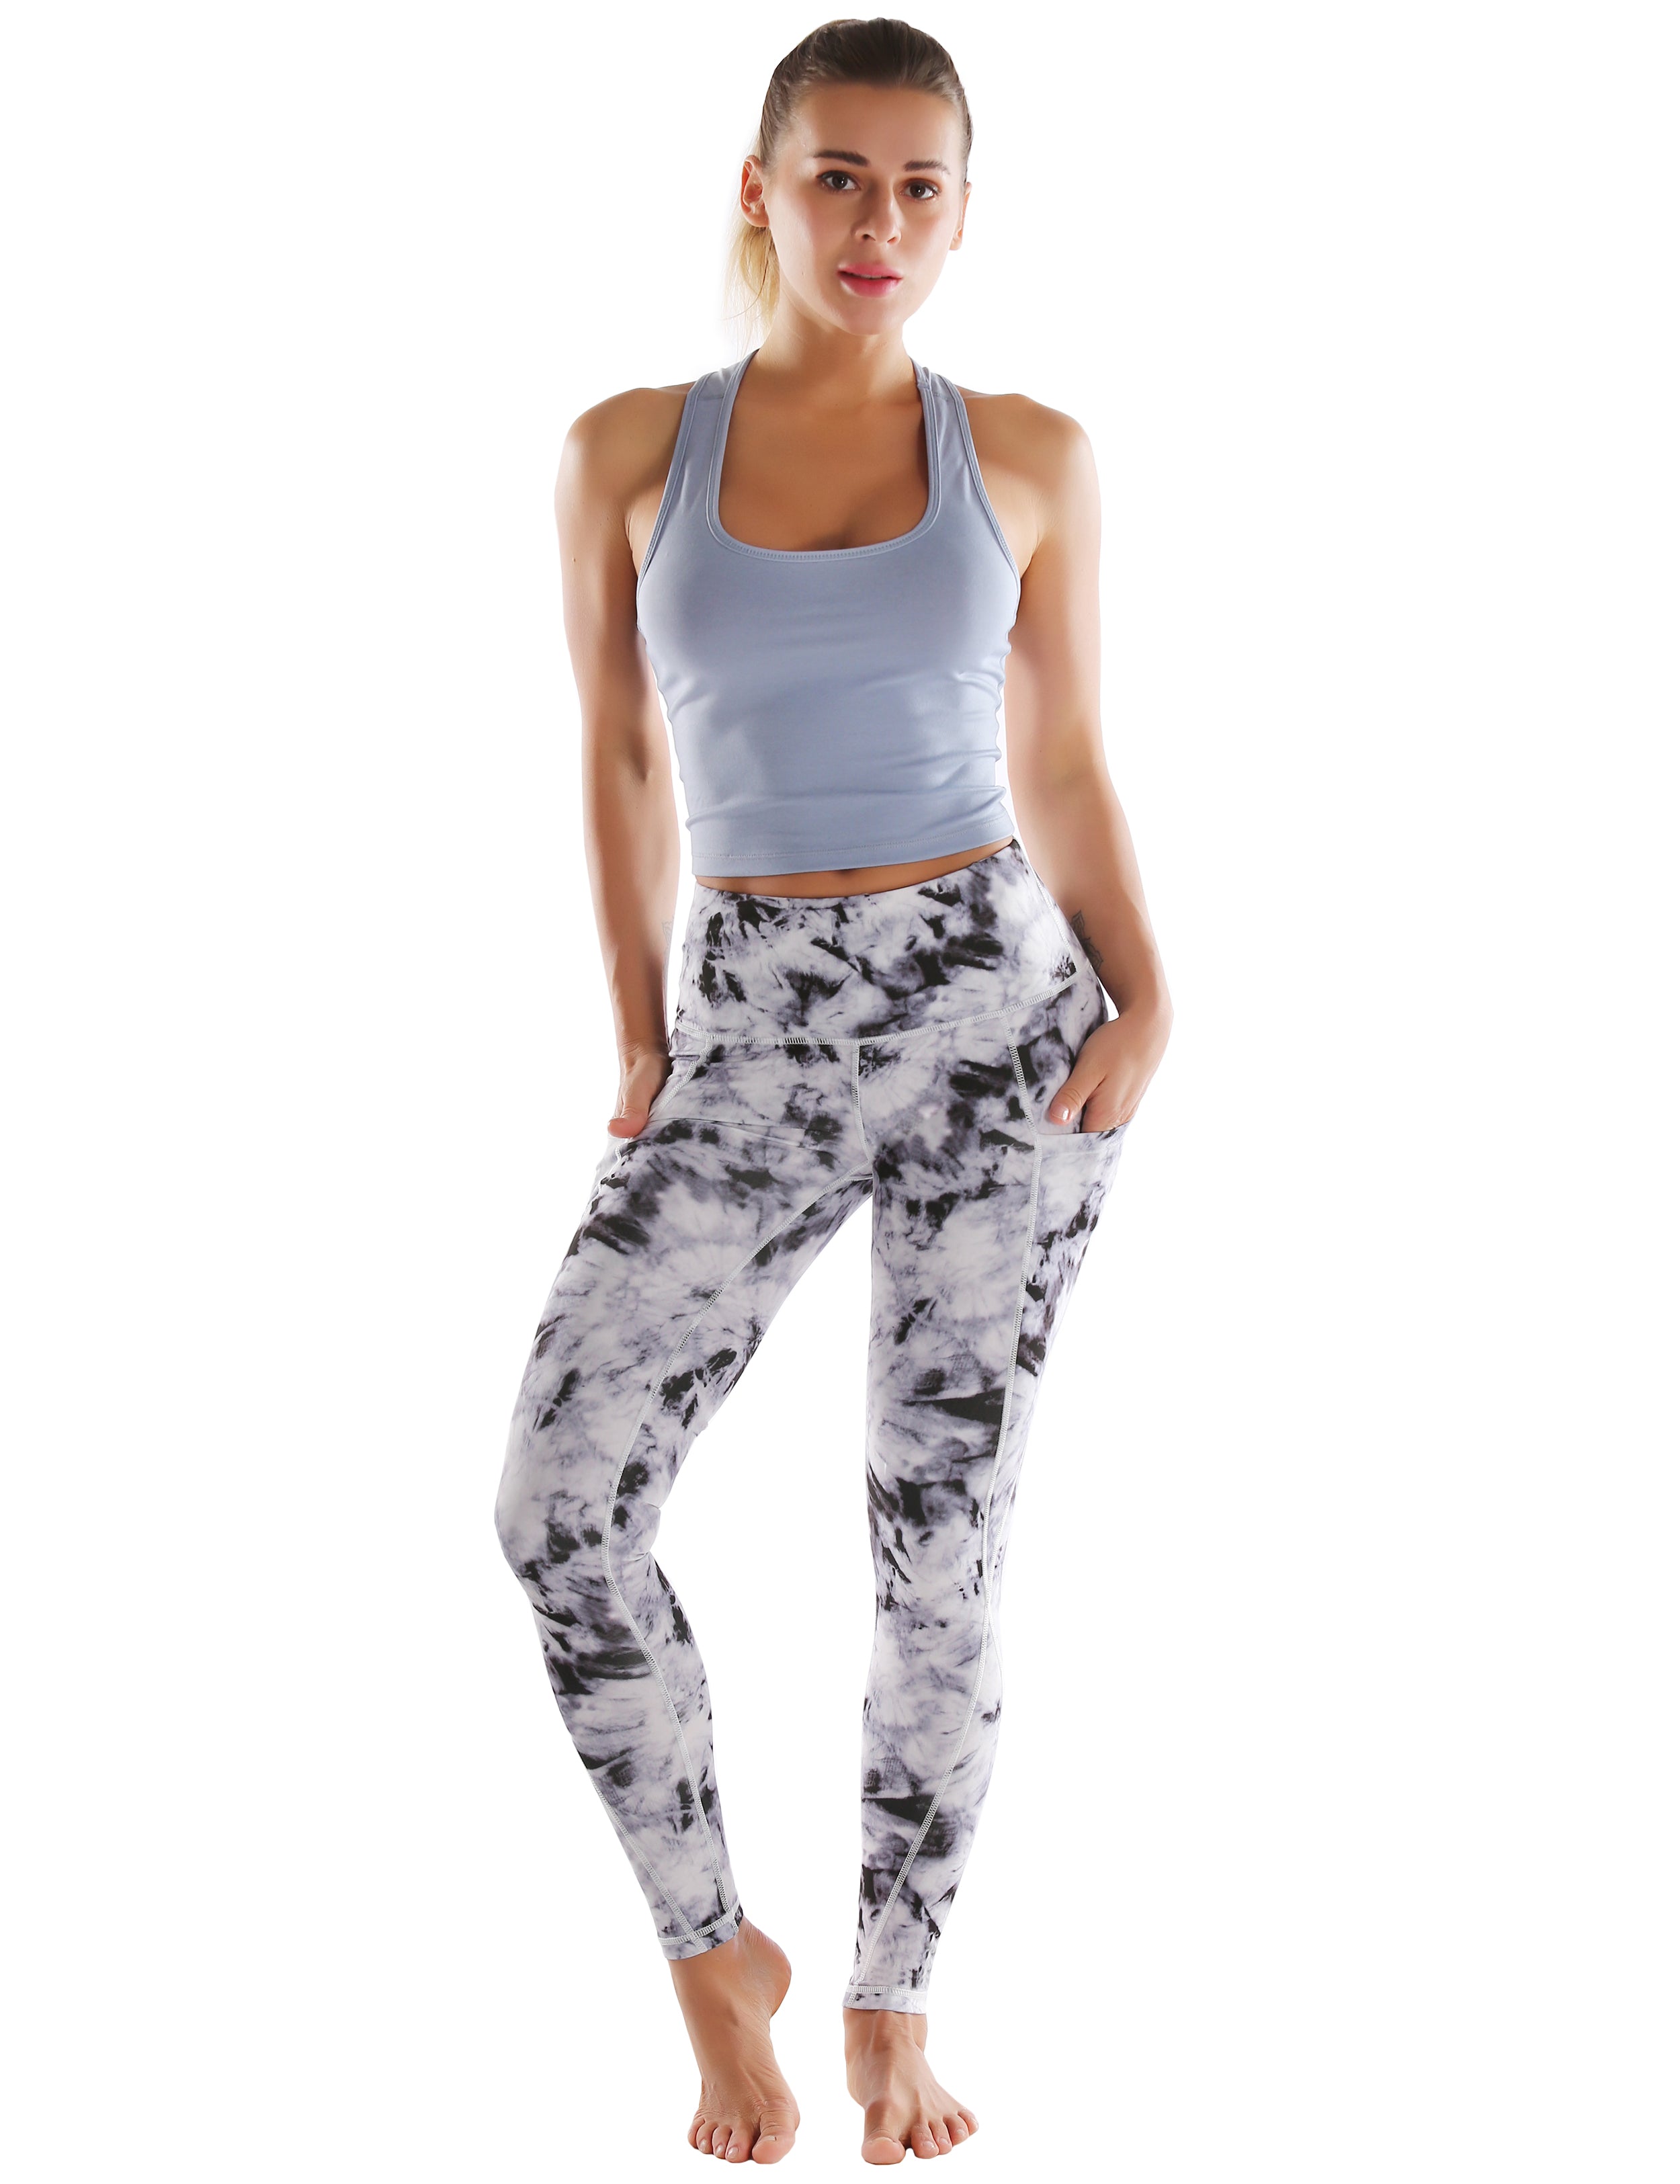 High Waist Side Pockets Running Pants blackdandelion 78%Polyester/22%Spandex Fabric doesn't attract lint easily 4-way stretch No see-through Moisture-wicking Tummy control Inner pocket